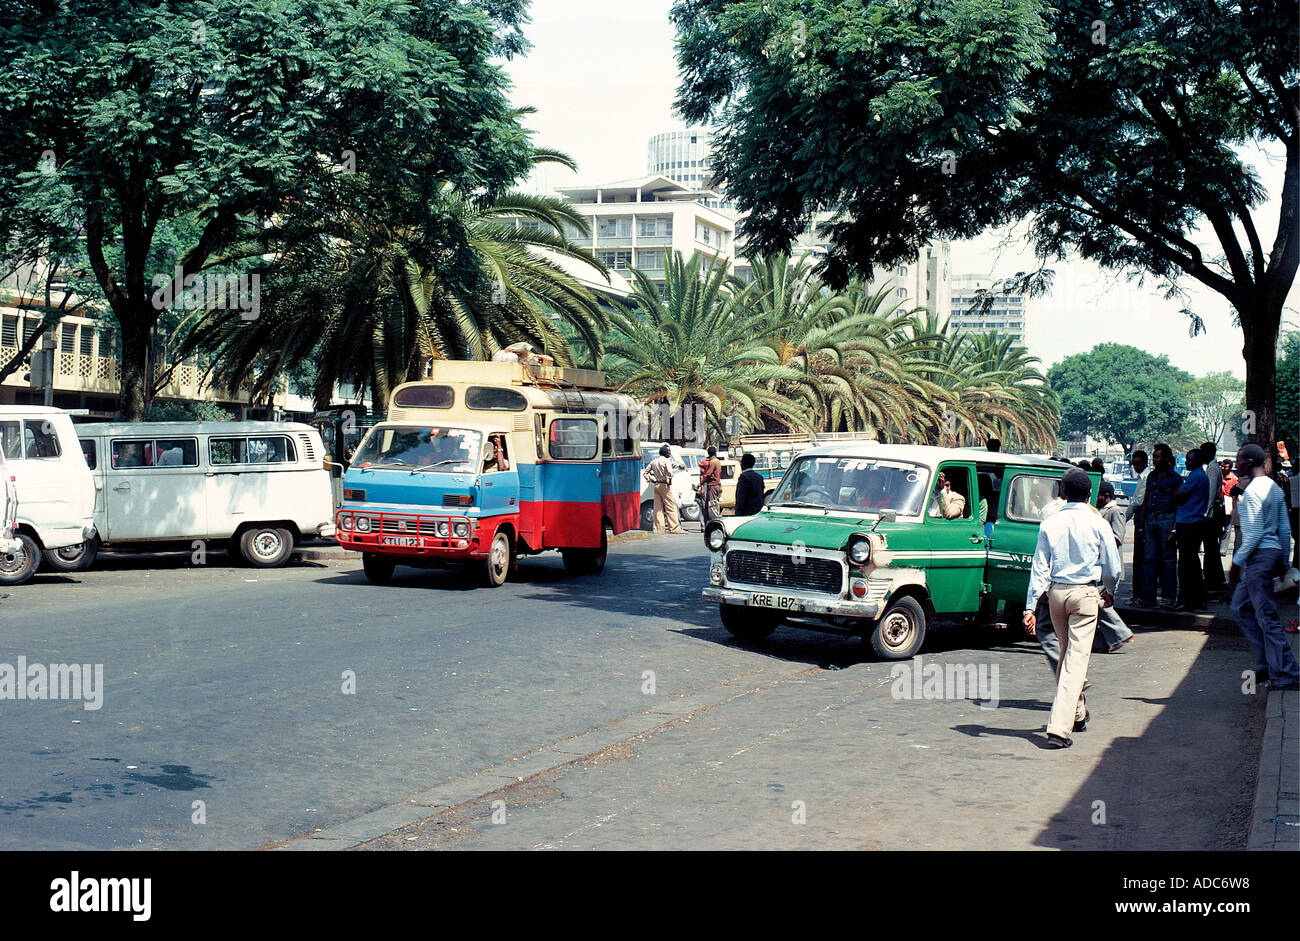 MATATUS or cheap local taxis or minibuses loading passengers on Moi Avenue in central Nairobi Kenya East Africa Stock Photo